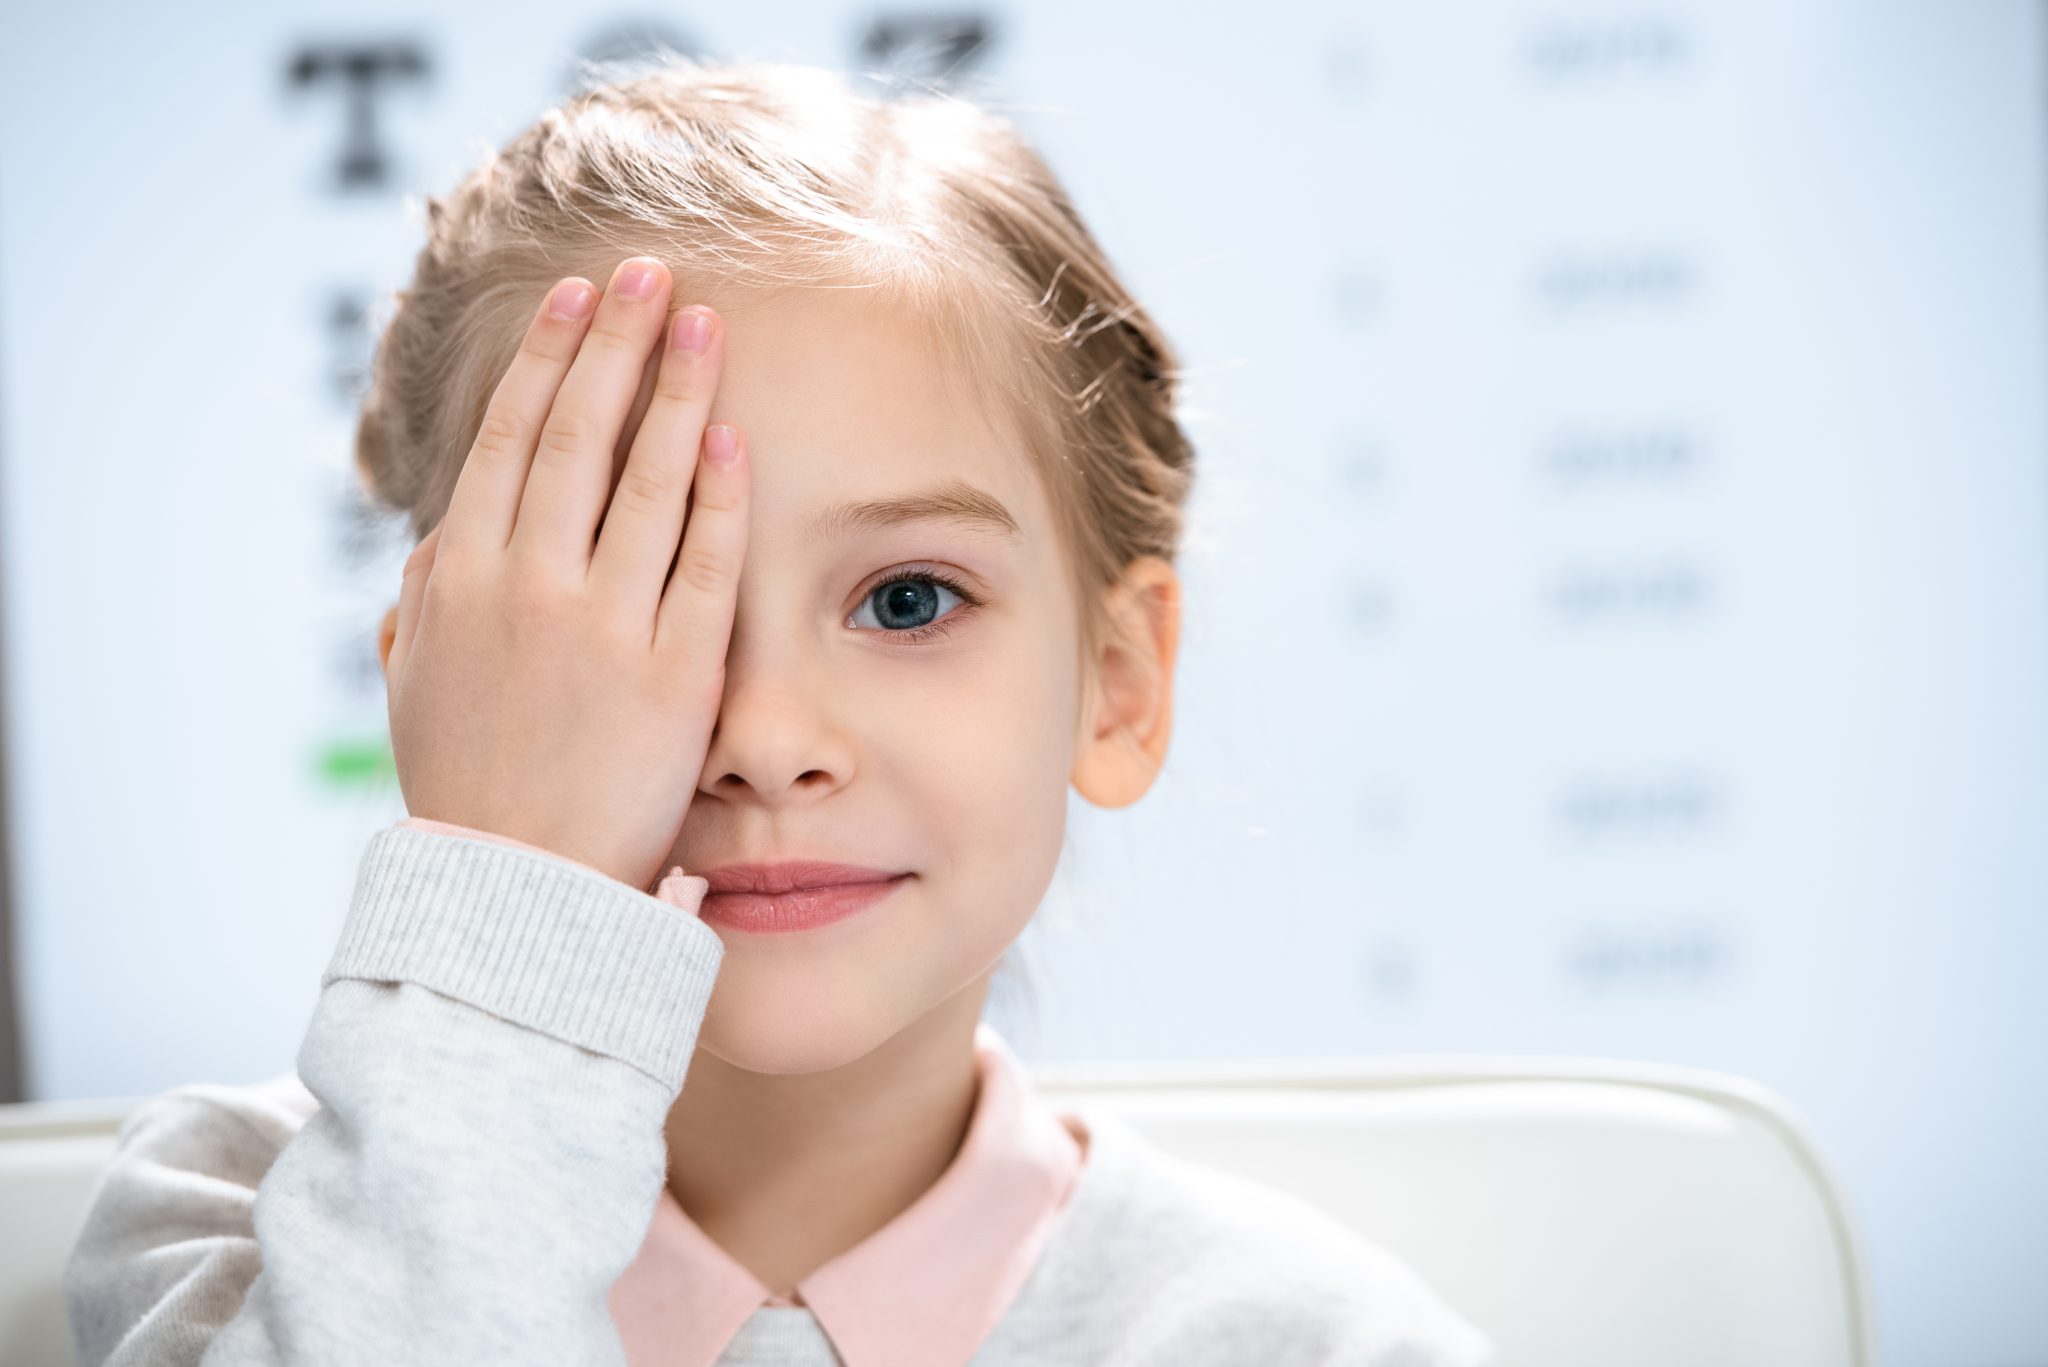 Ask the optometrist : the signs to look out for that mean your child needs glasses